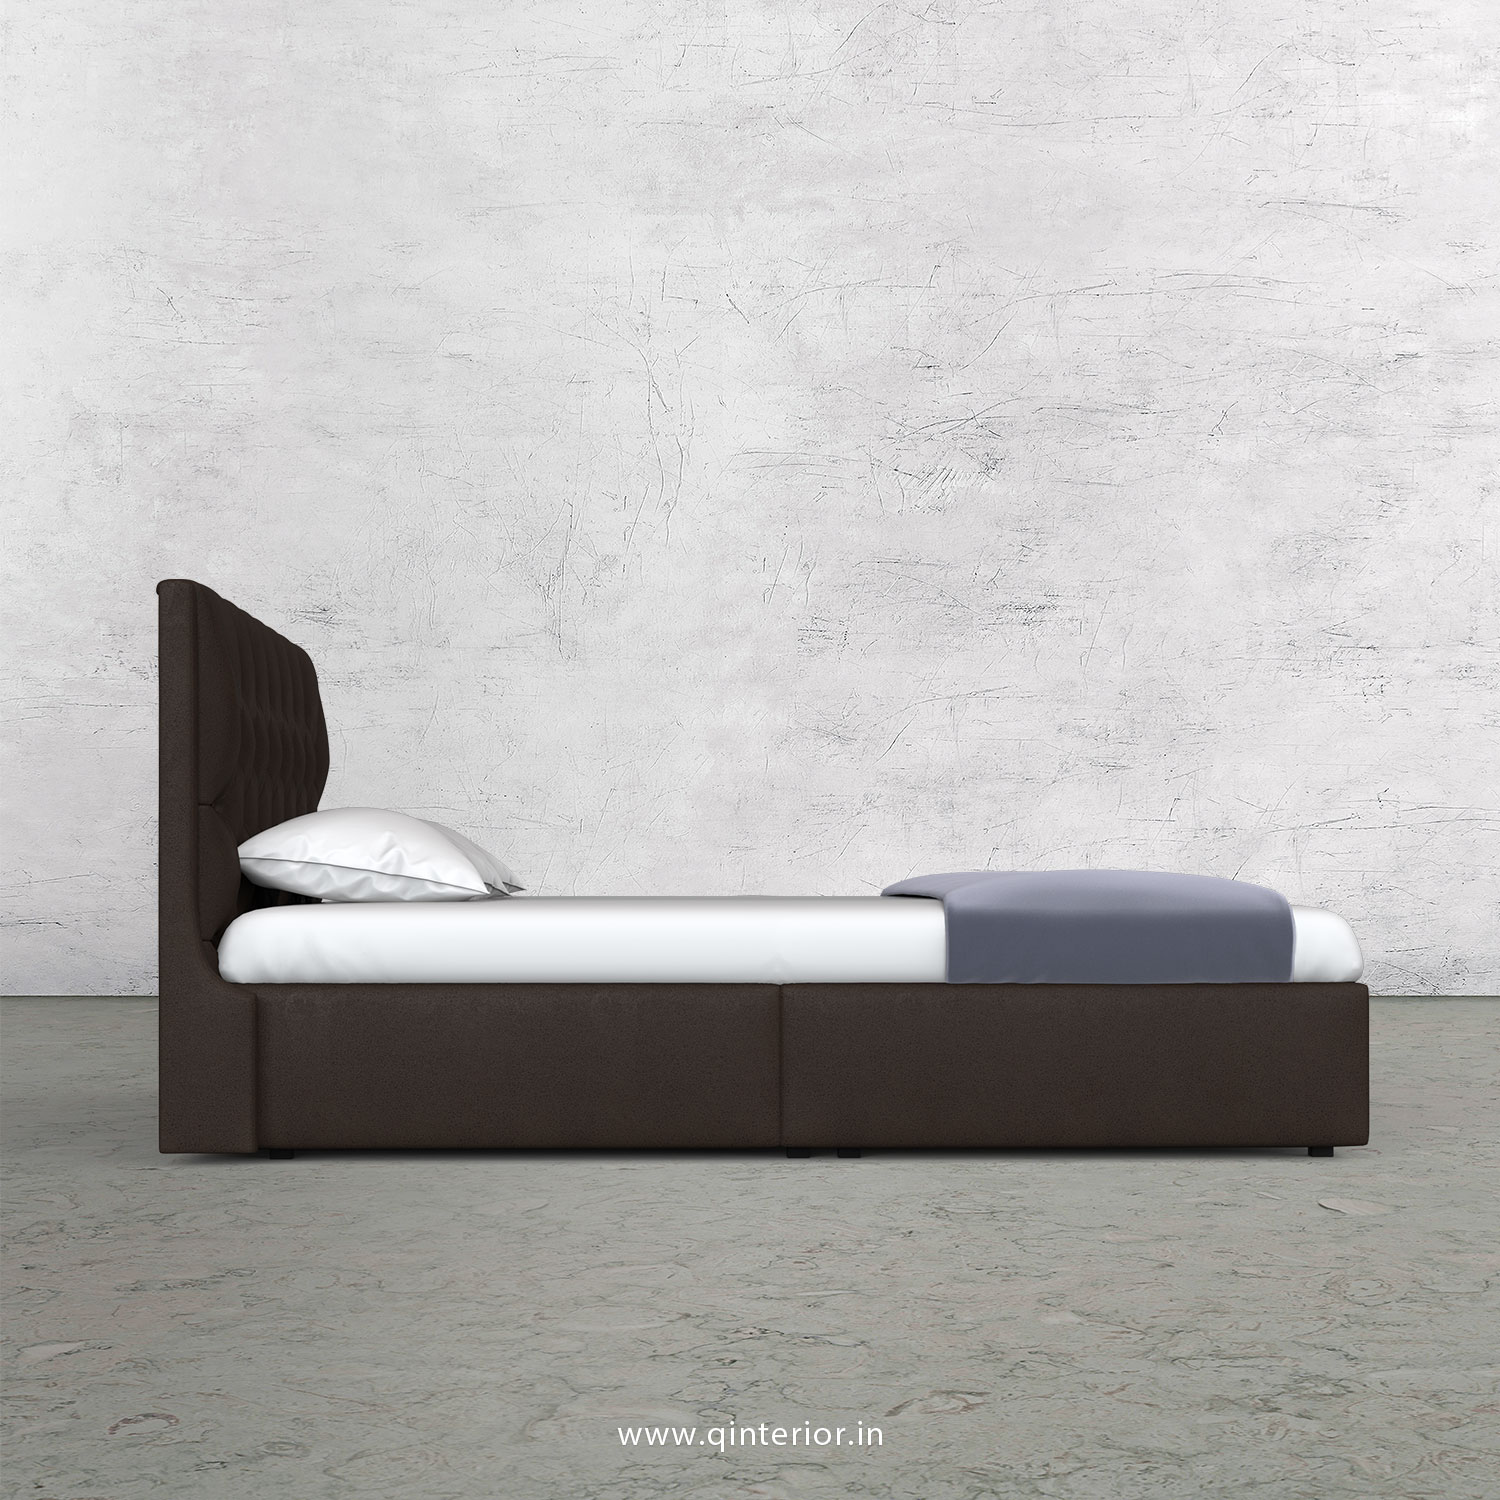 Scorpius Queen Bed in Fab Leather Fabric - QBD009 FL16